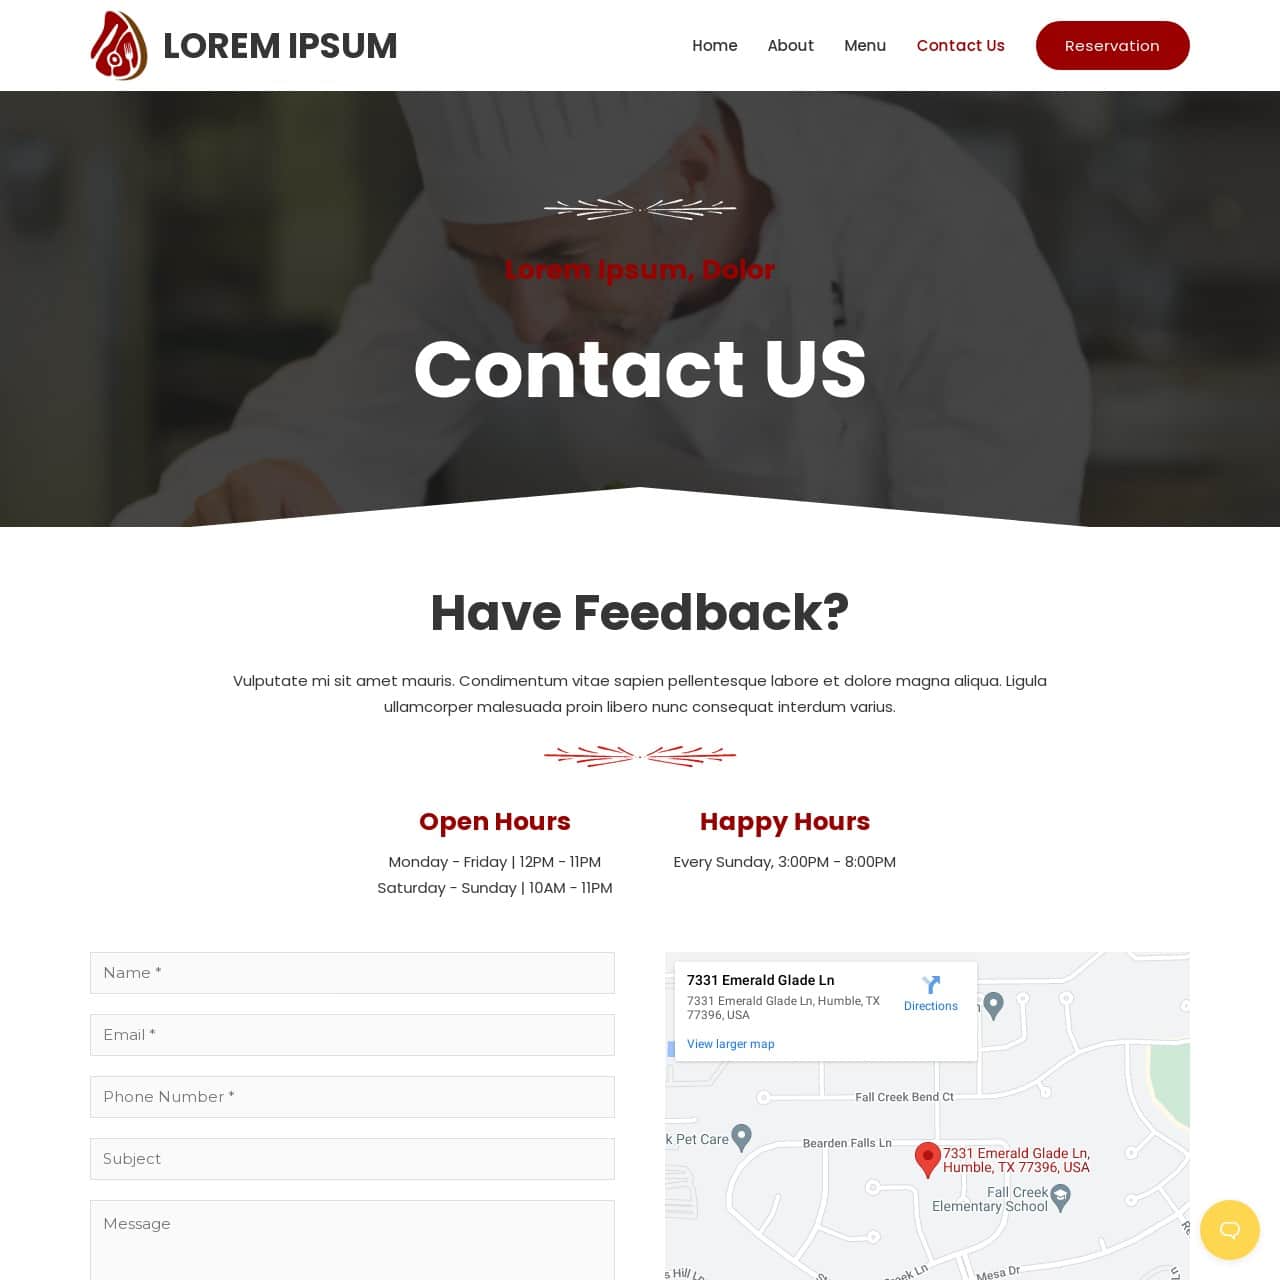 Food Template - Contact Us Page